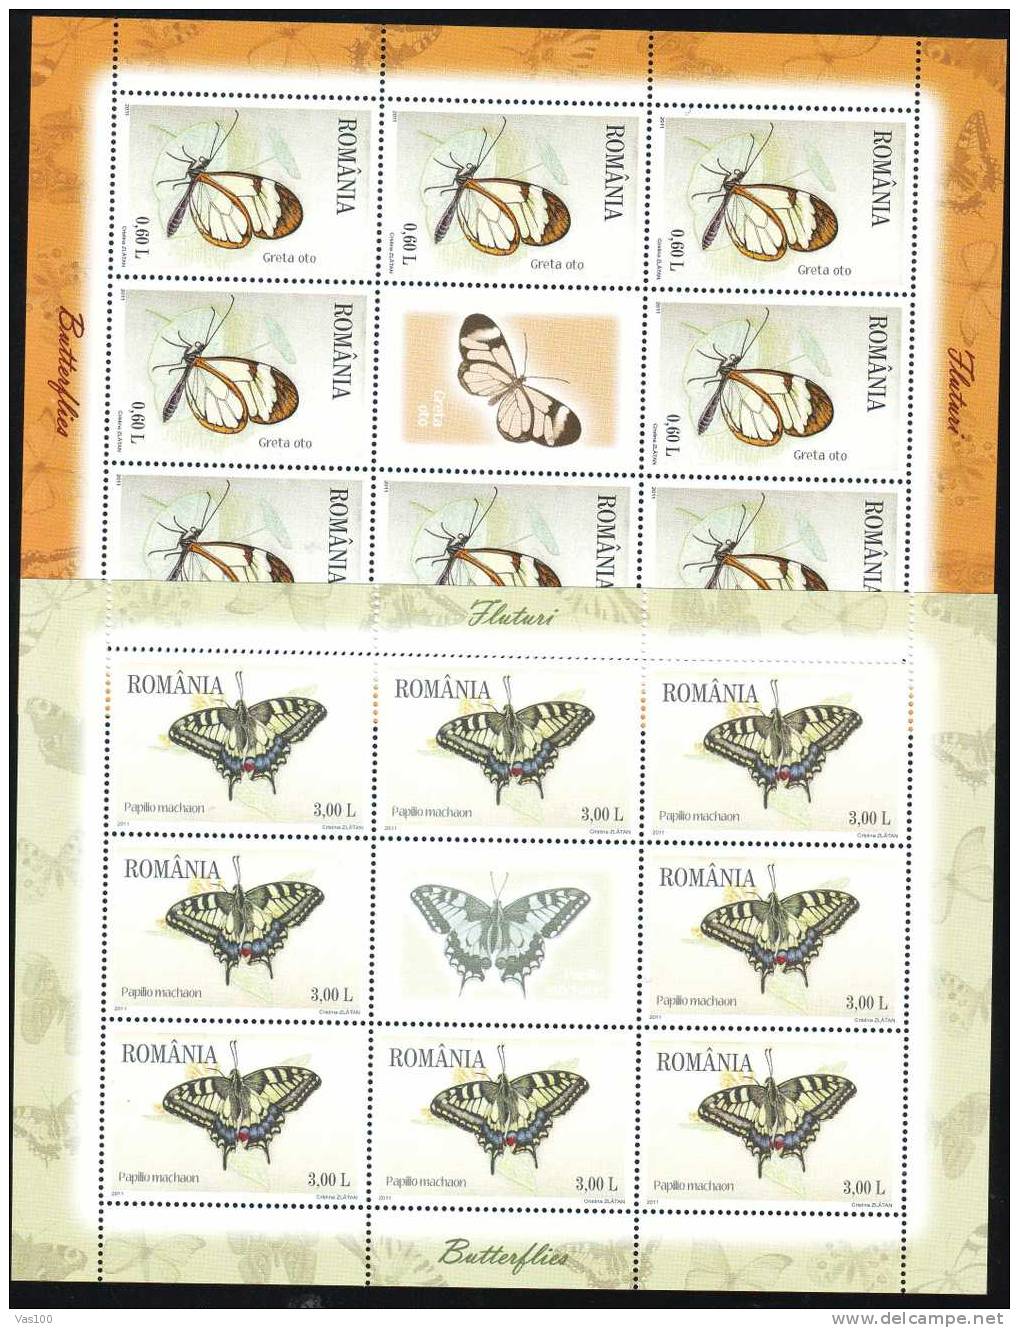 Papillons Butterflys 2011 Minisheet 6X 8 Stamps + Labels! MNH Romania. - Full Sheets & Multiples